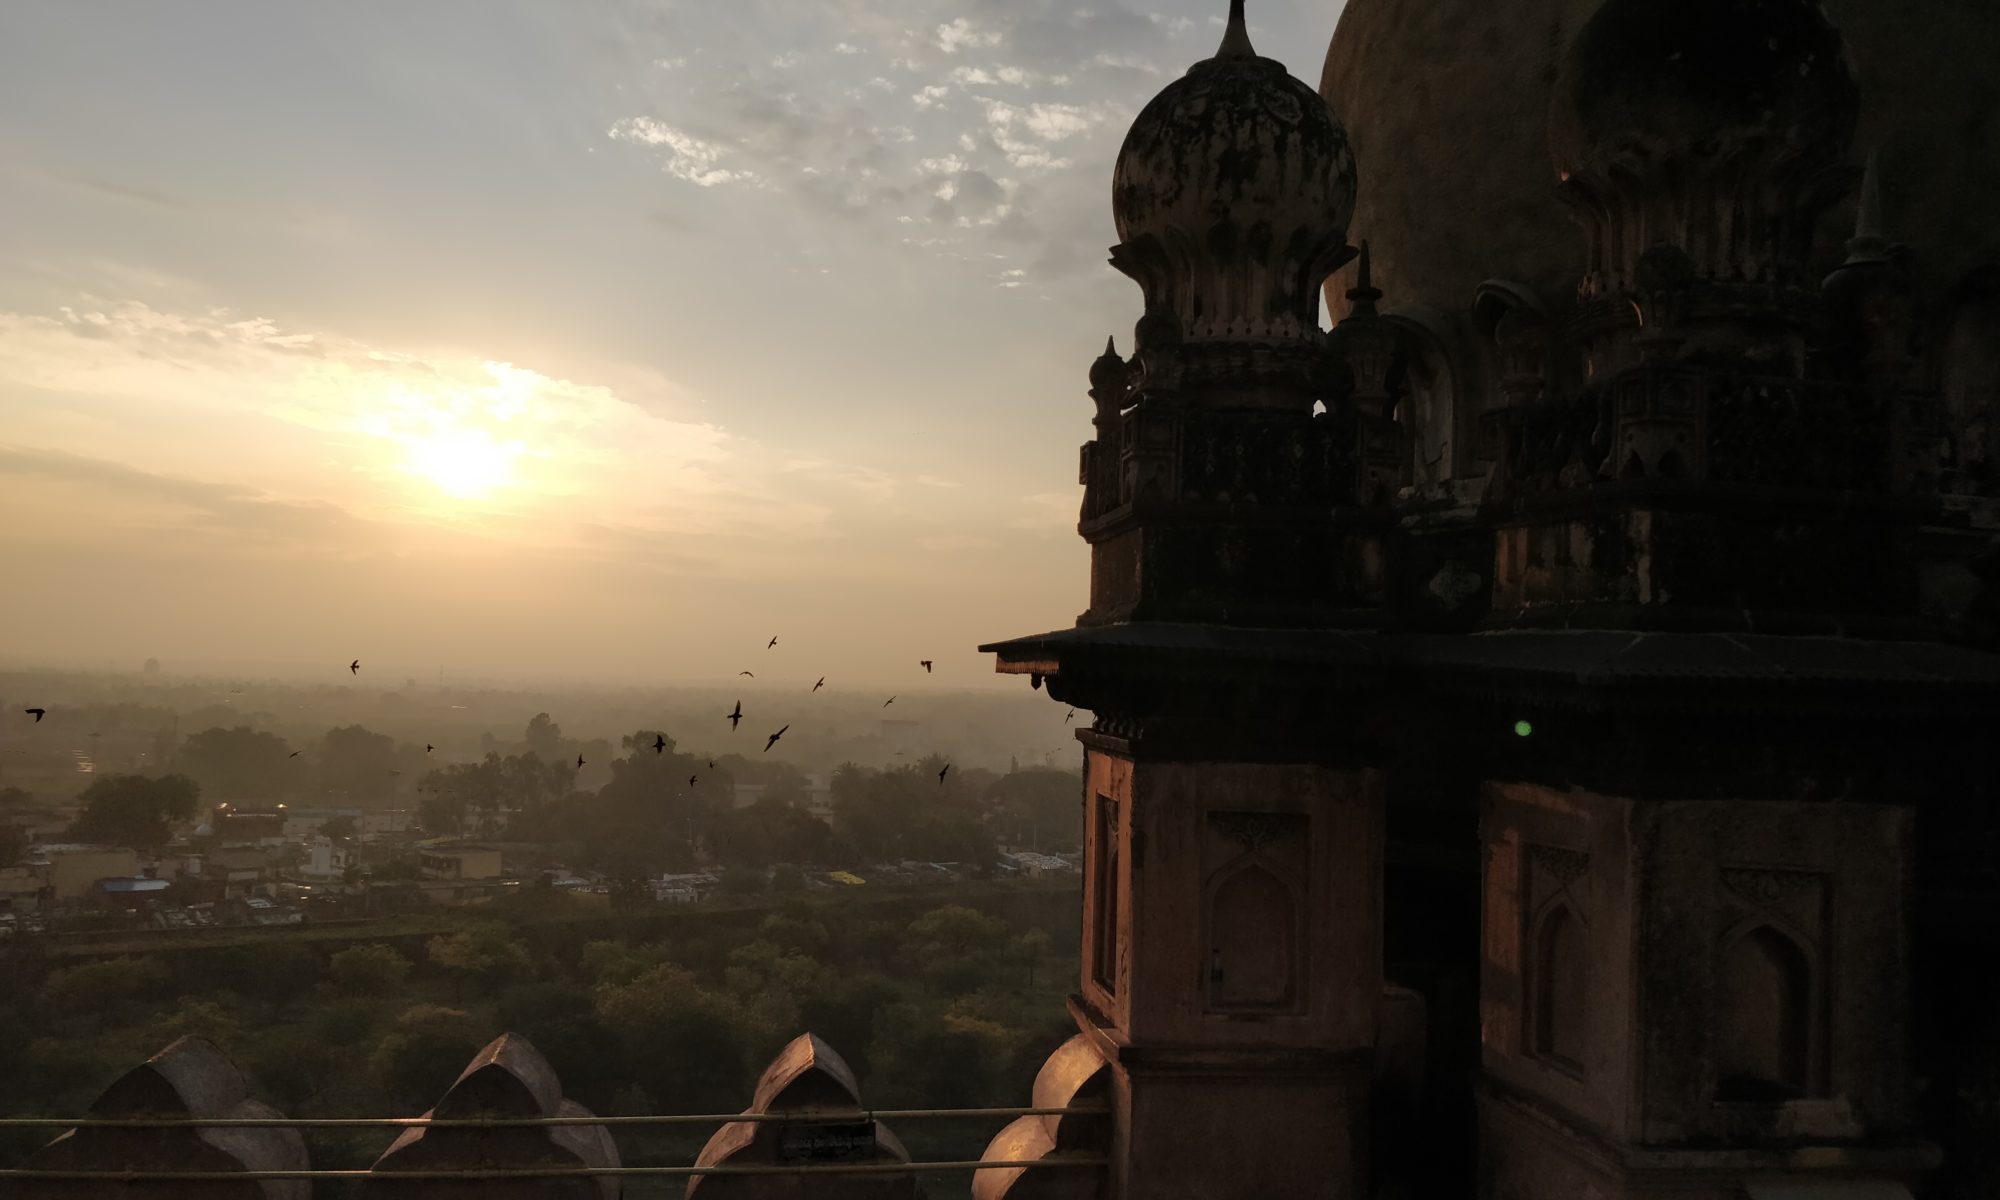 morning sun and the city view from the top of Gol Gumbaz